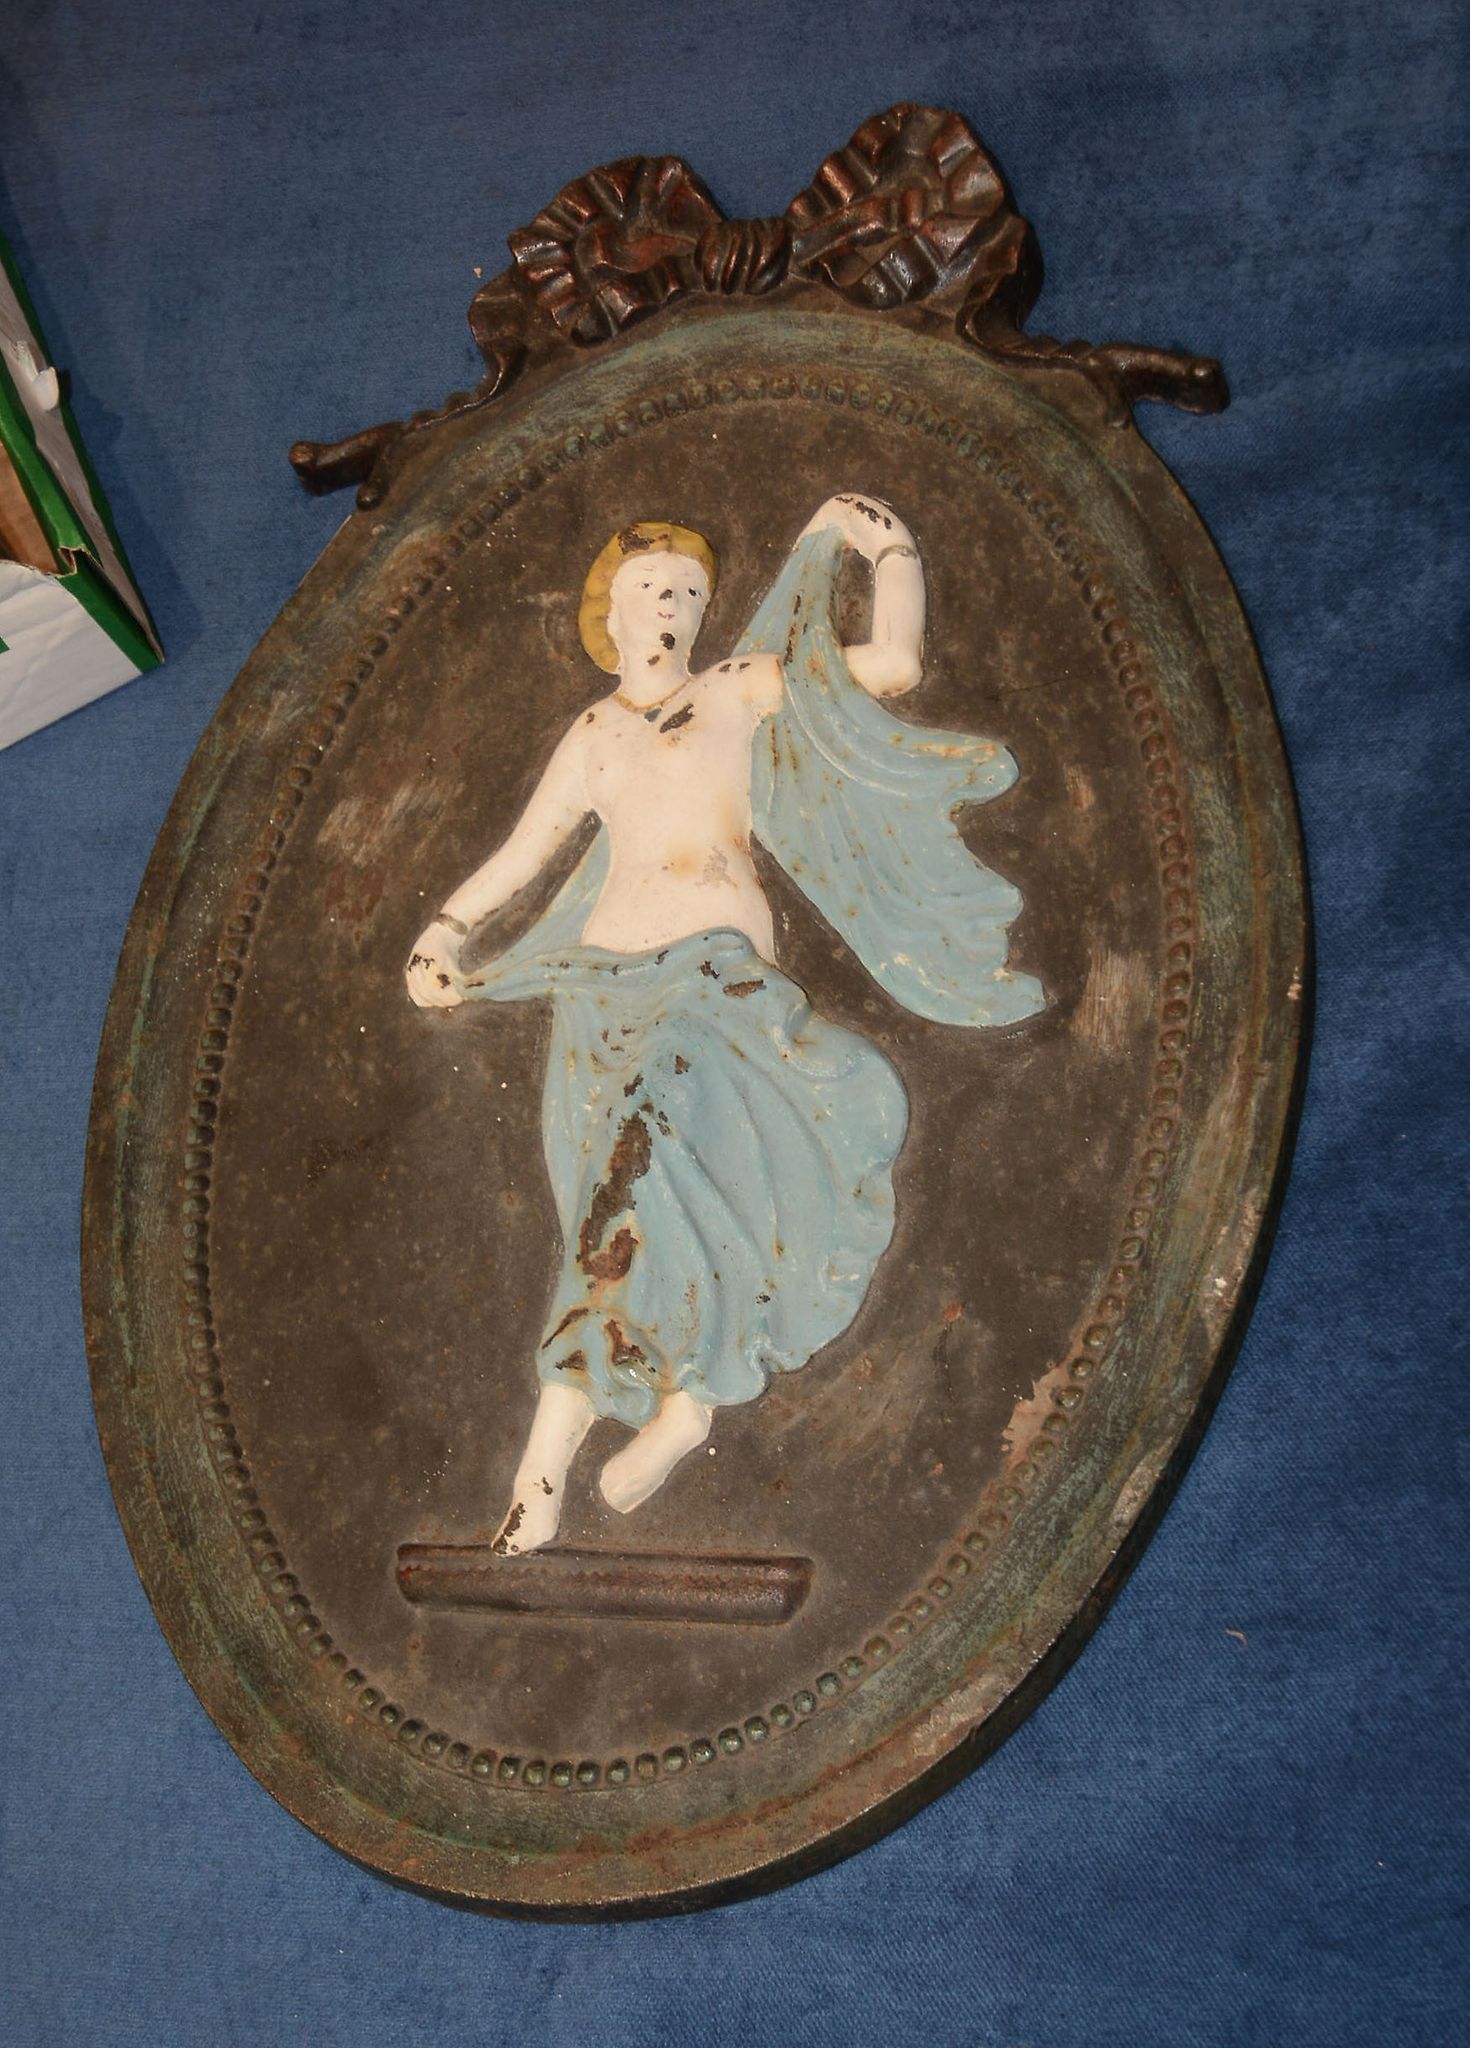 A cast iron wall plaque, cast in relief with dancing maiden and surmounted by a bow, 52cm x 32cm